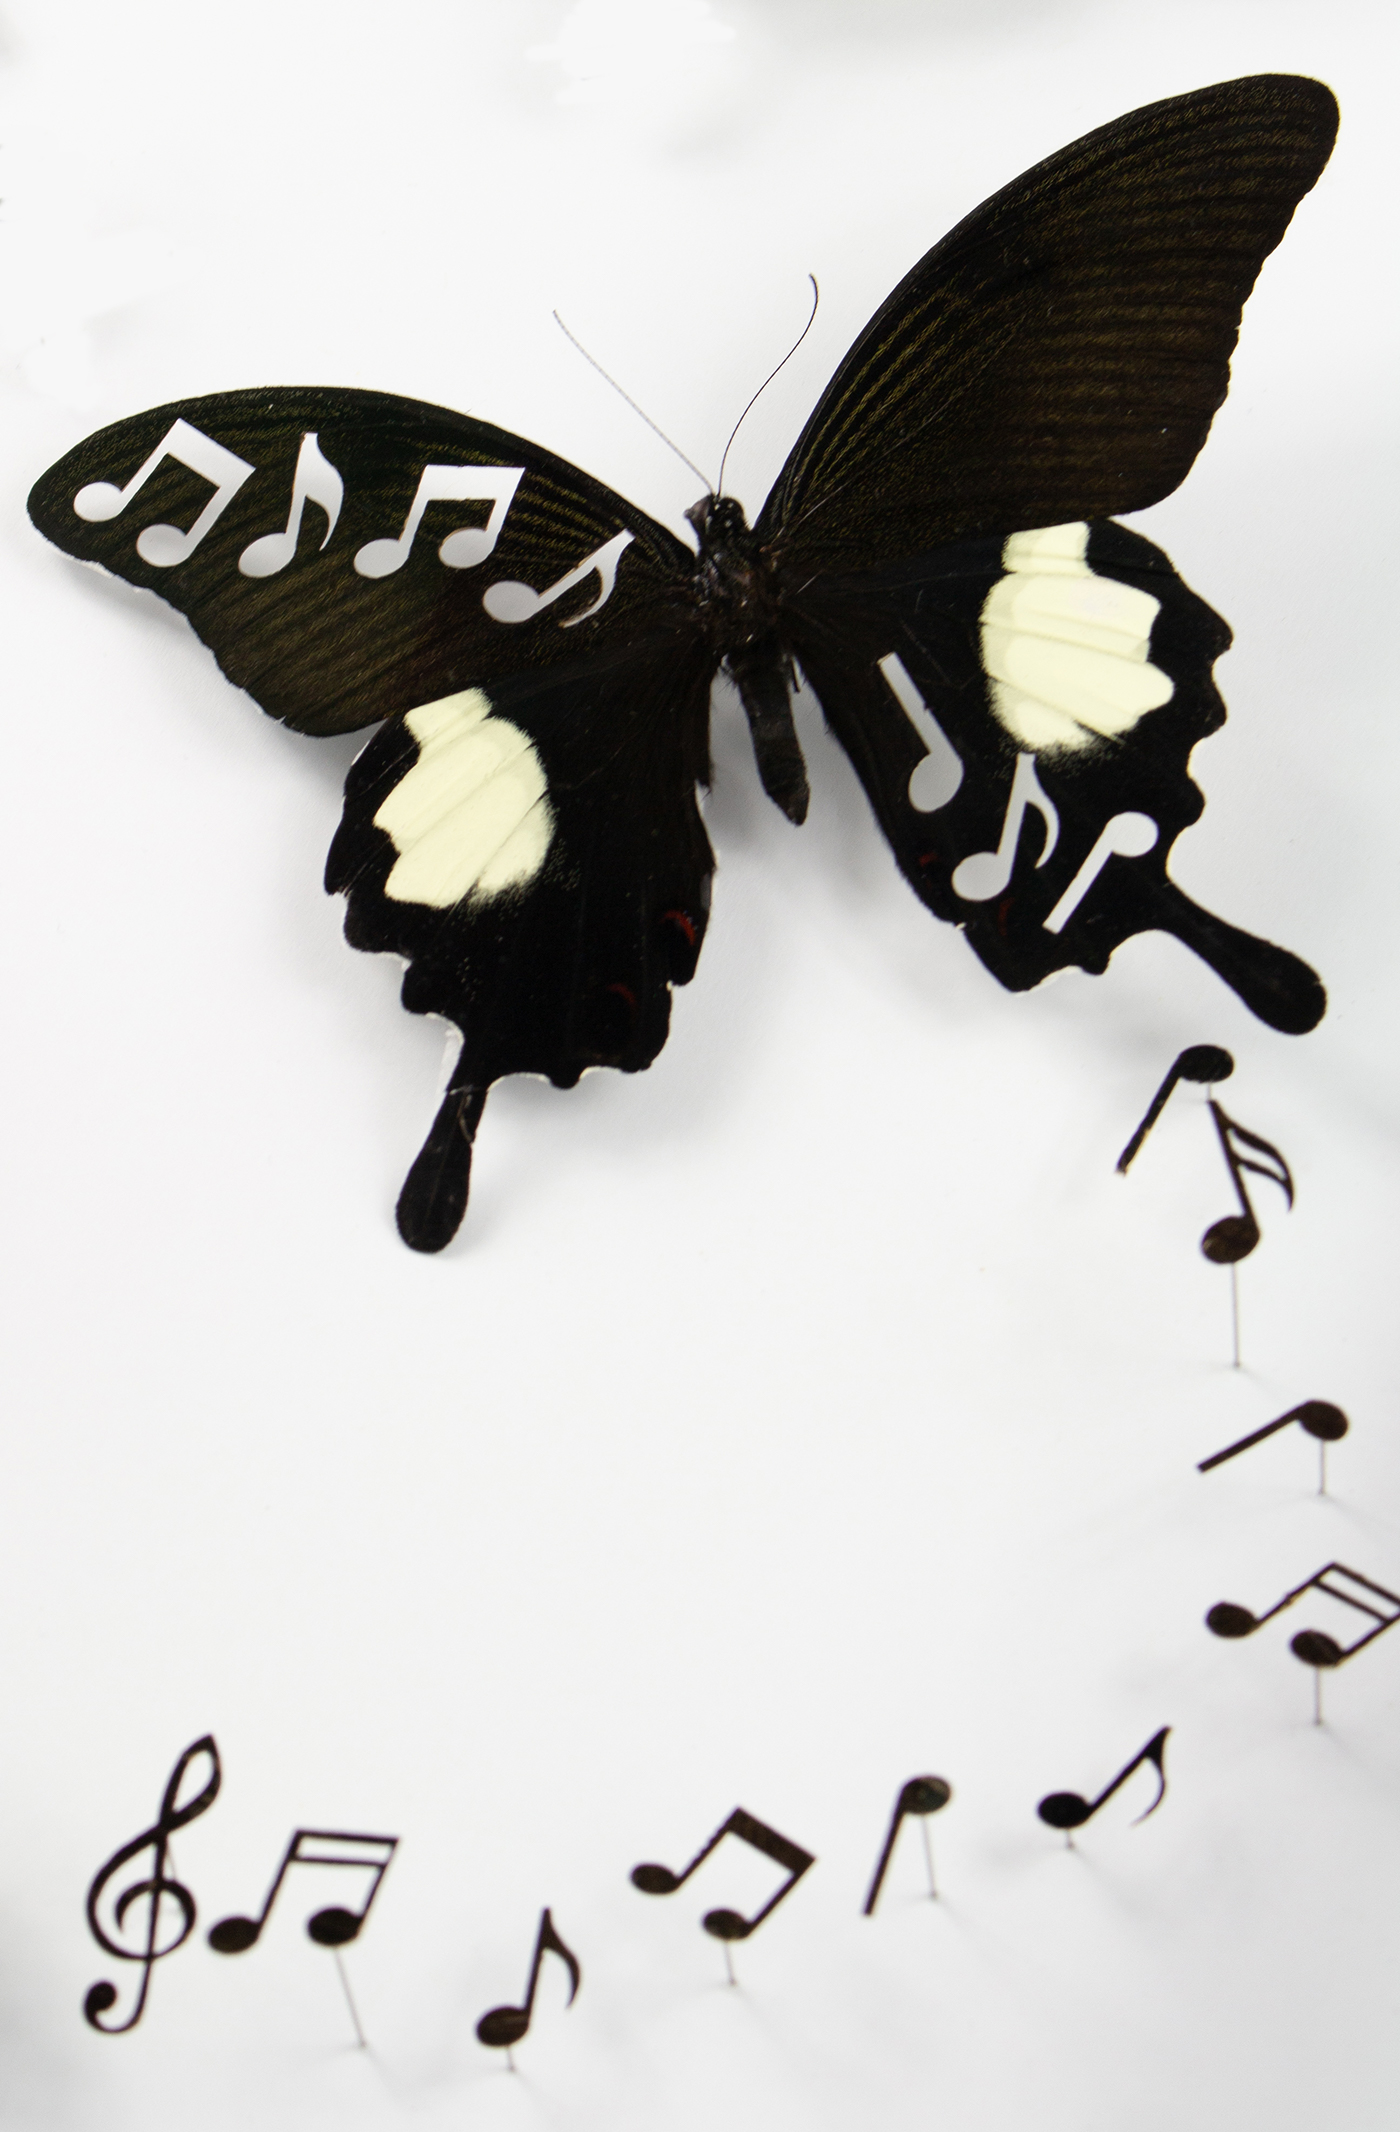 Vanitas 1 taxidermy piece by Fiona Parkinson, three butterflies cut into a music note pattern